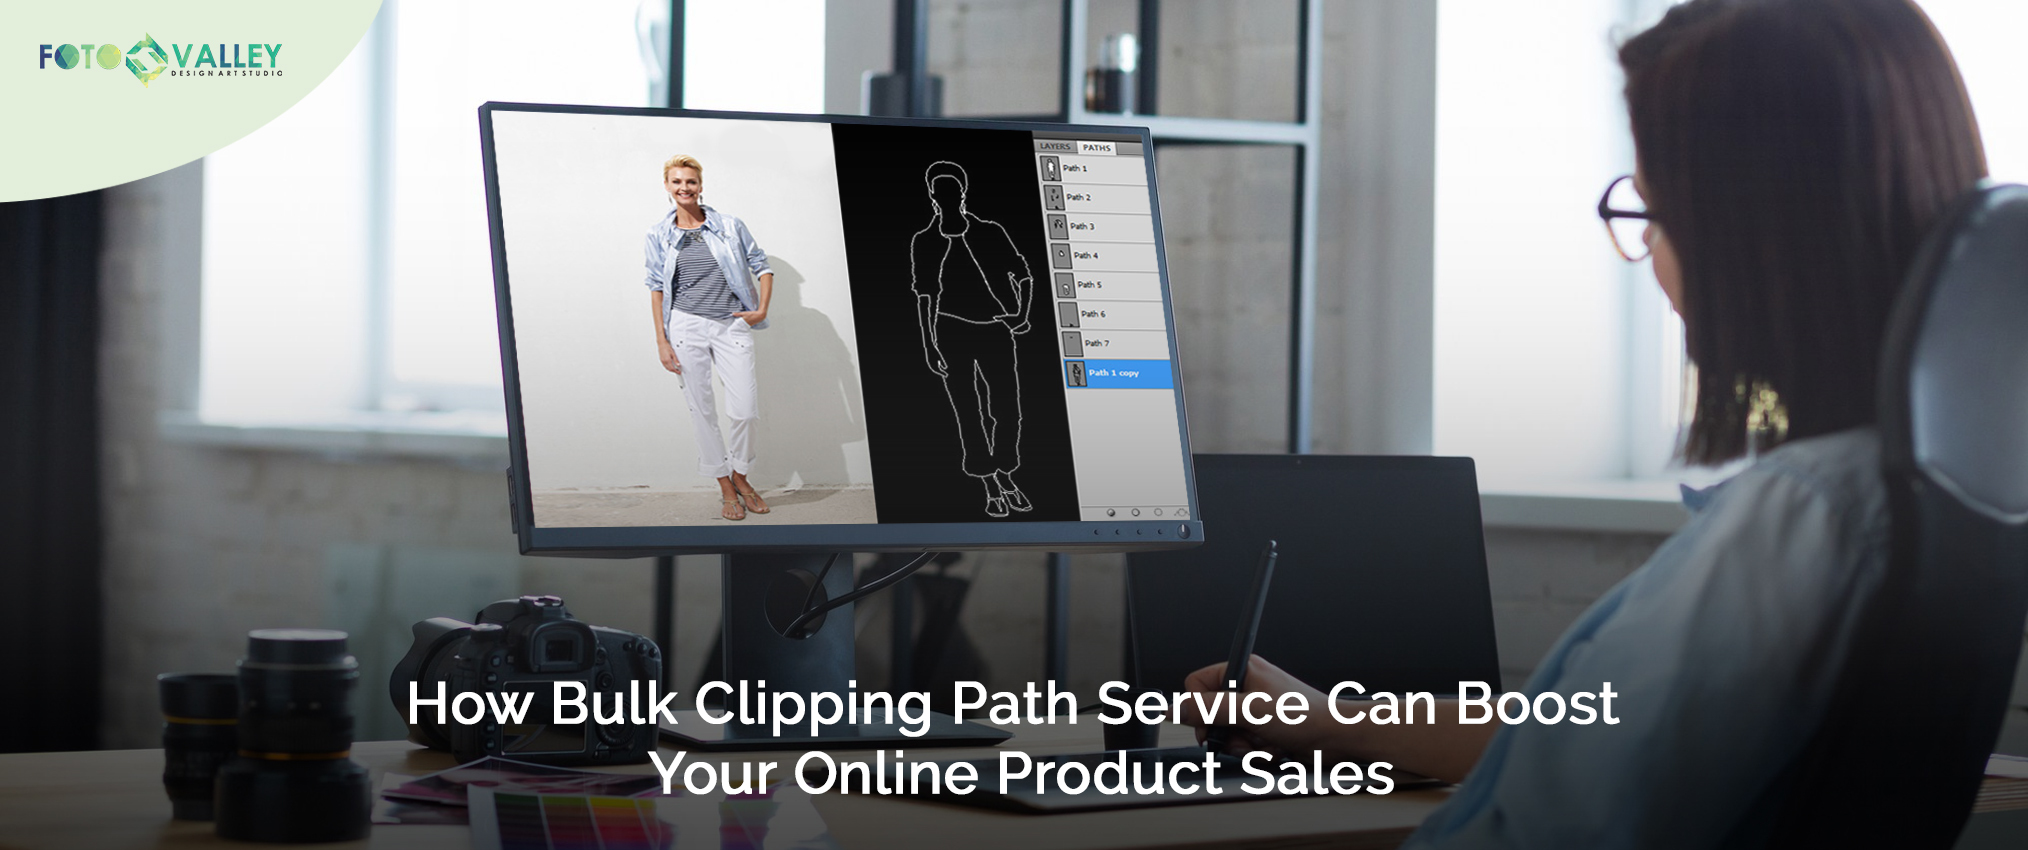 A woman meticulously working on an image, demonstrating the precision of bulk clipping path service.